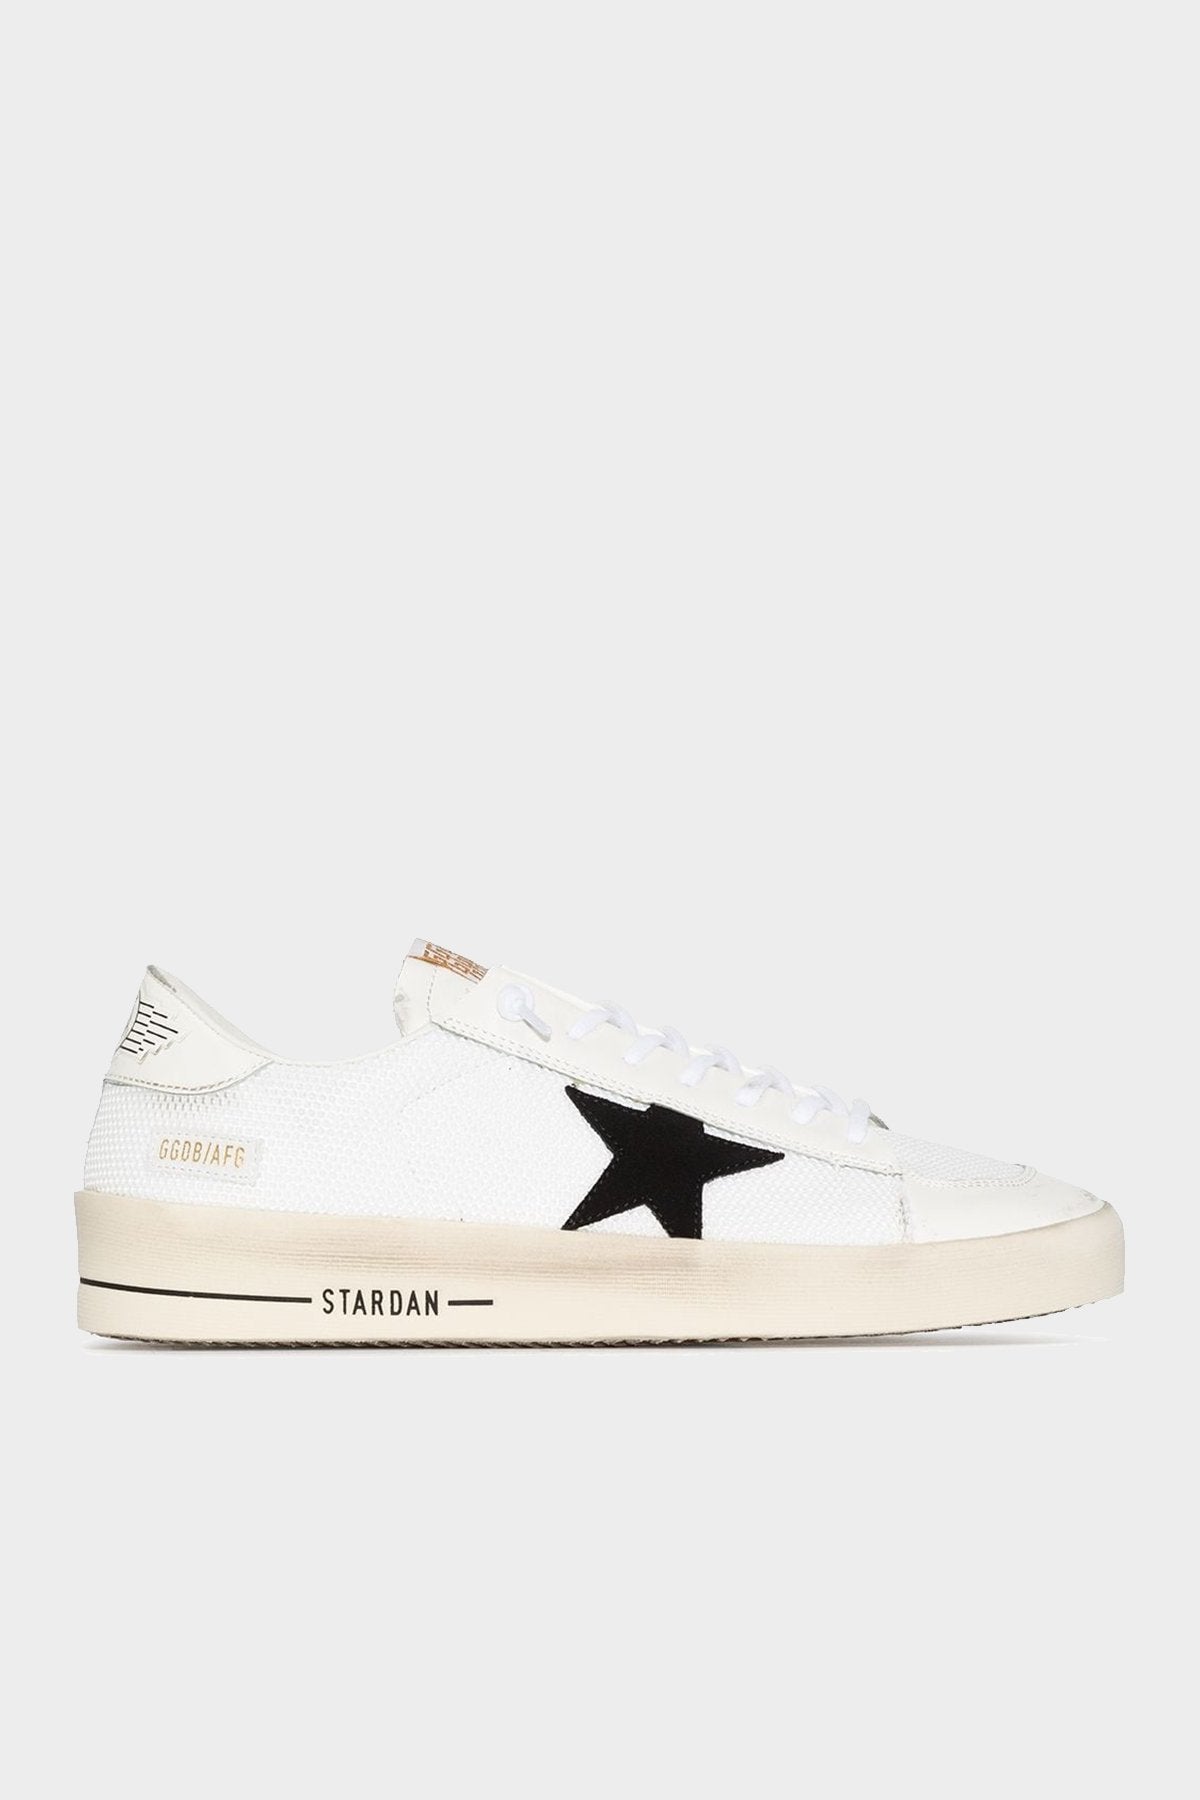 Stardan Mesh and Shiny Leather Sneakers in White - shop-olivia.com